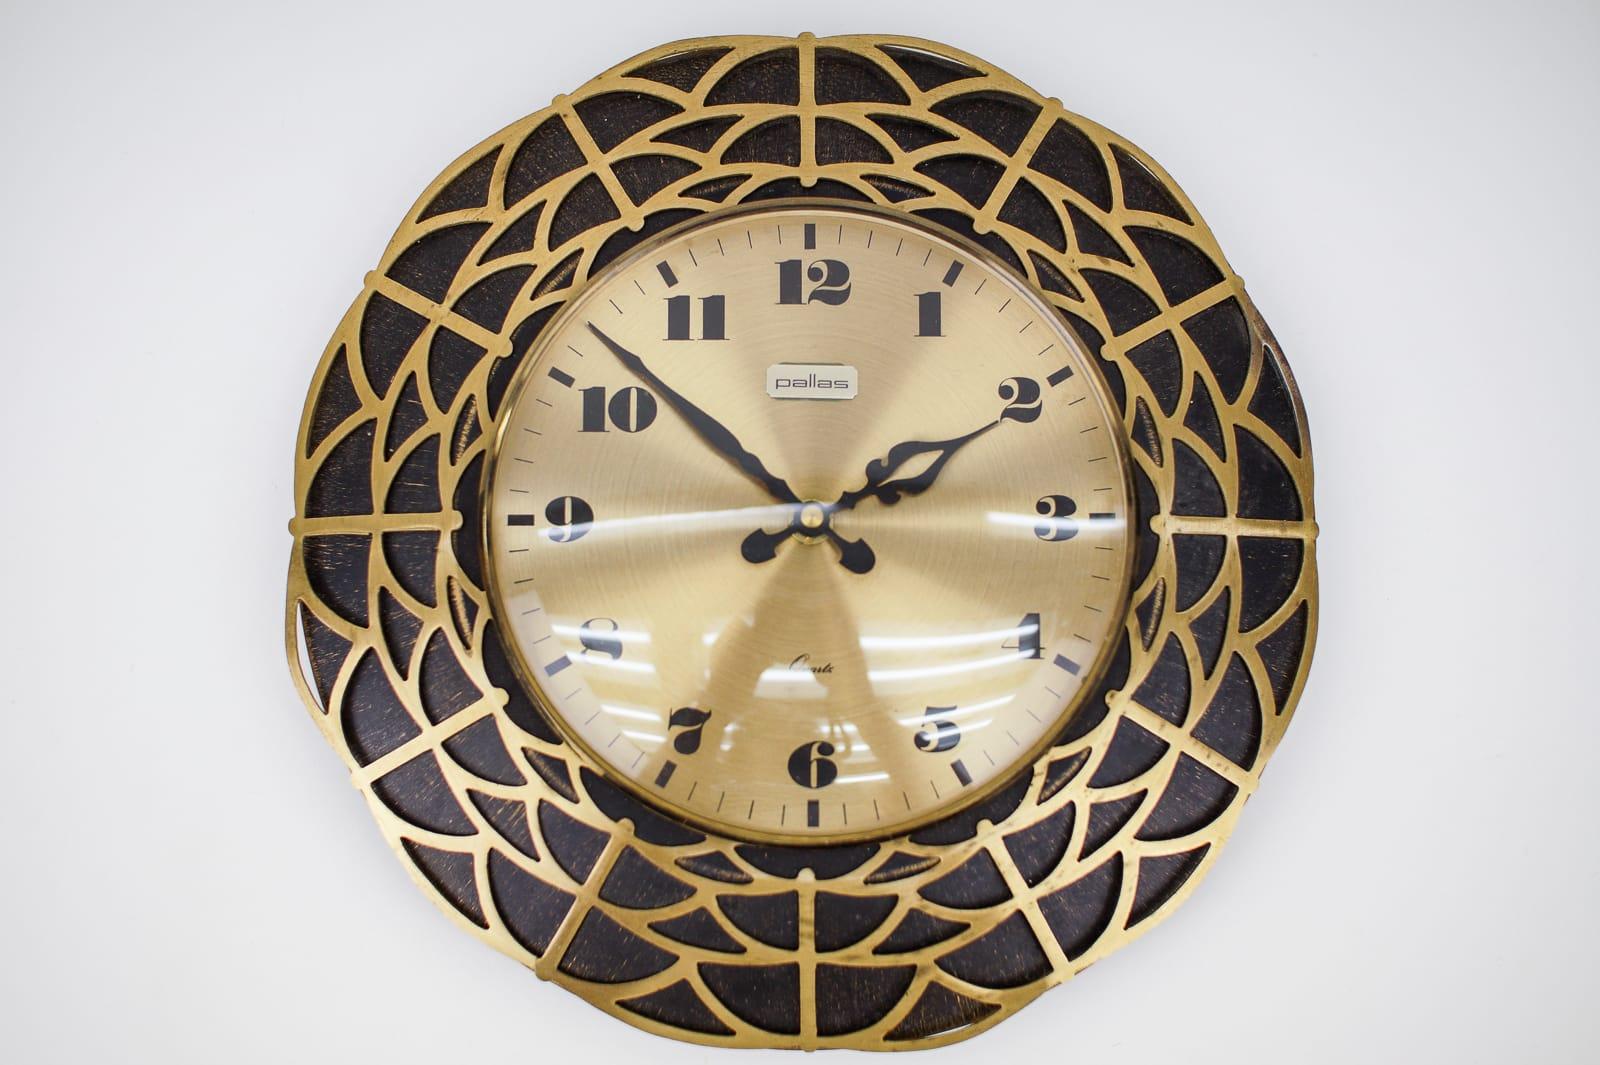 Stunning sunburst wall clock made of brass, metal and glass. 

An eye catcher par excellence.

Made in Germany.

Electric, battery operated clock.